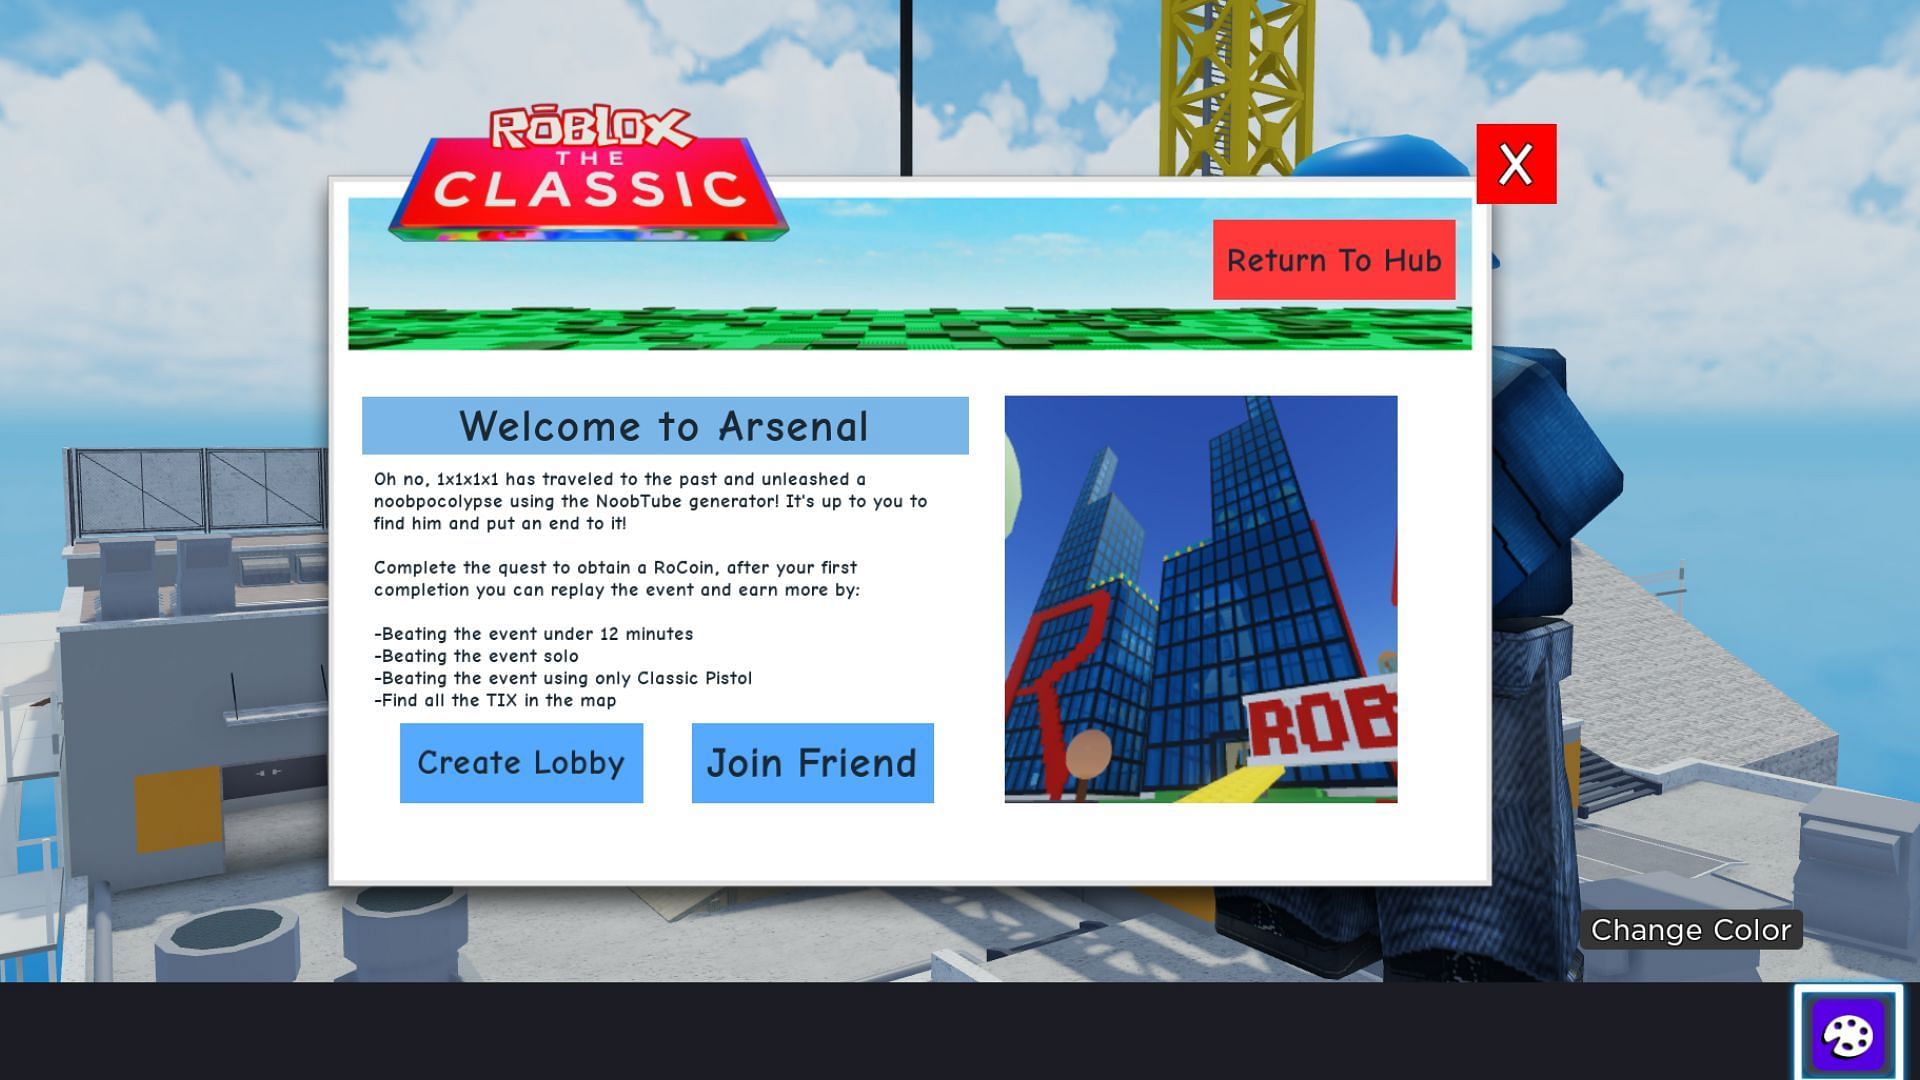 One can start the Roblox The Classic Arsenal event through The Classic portal or by searching the experience (Image via Roblox || Sportskeeda)